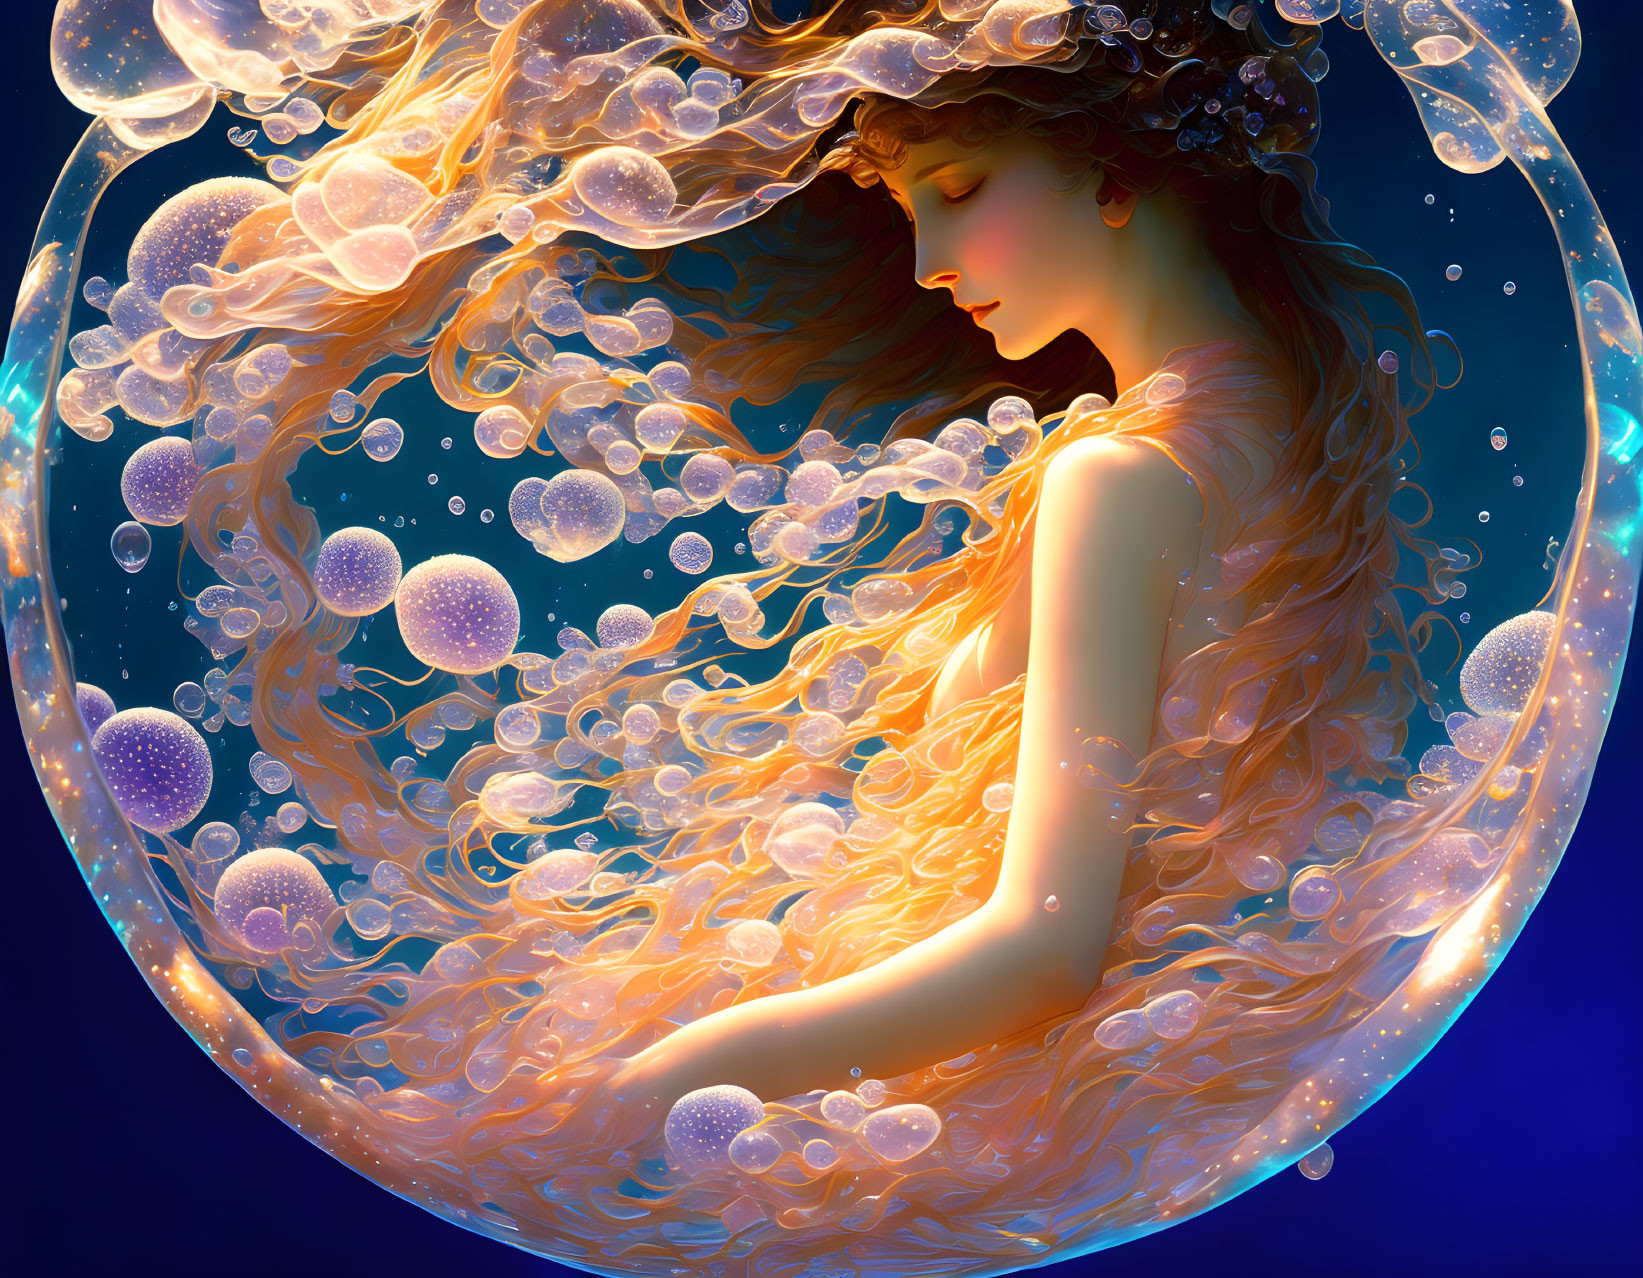 Illustration of woman with flowing hair surrounded by jellyfish in luminescent bubble